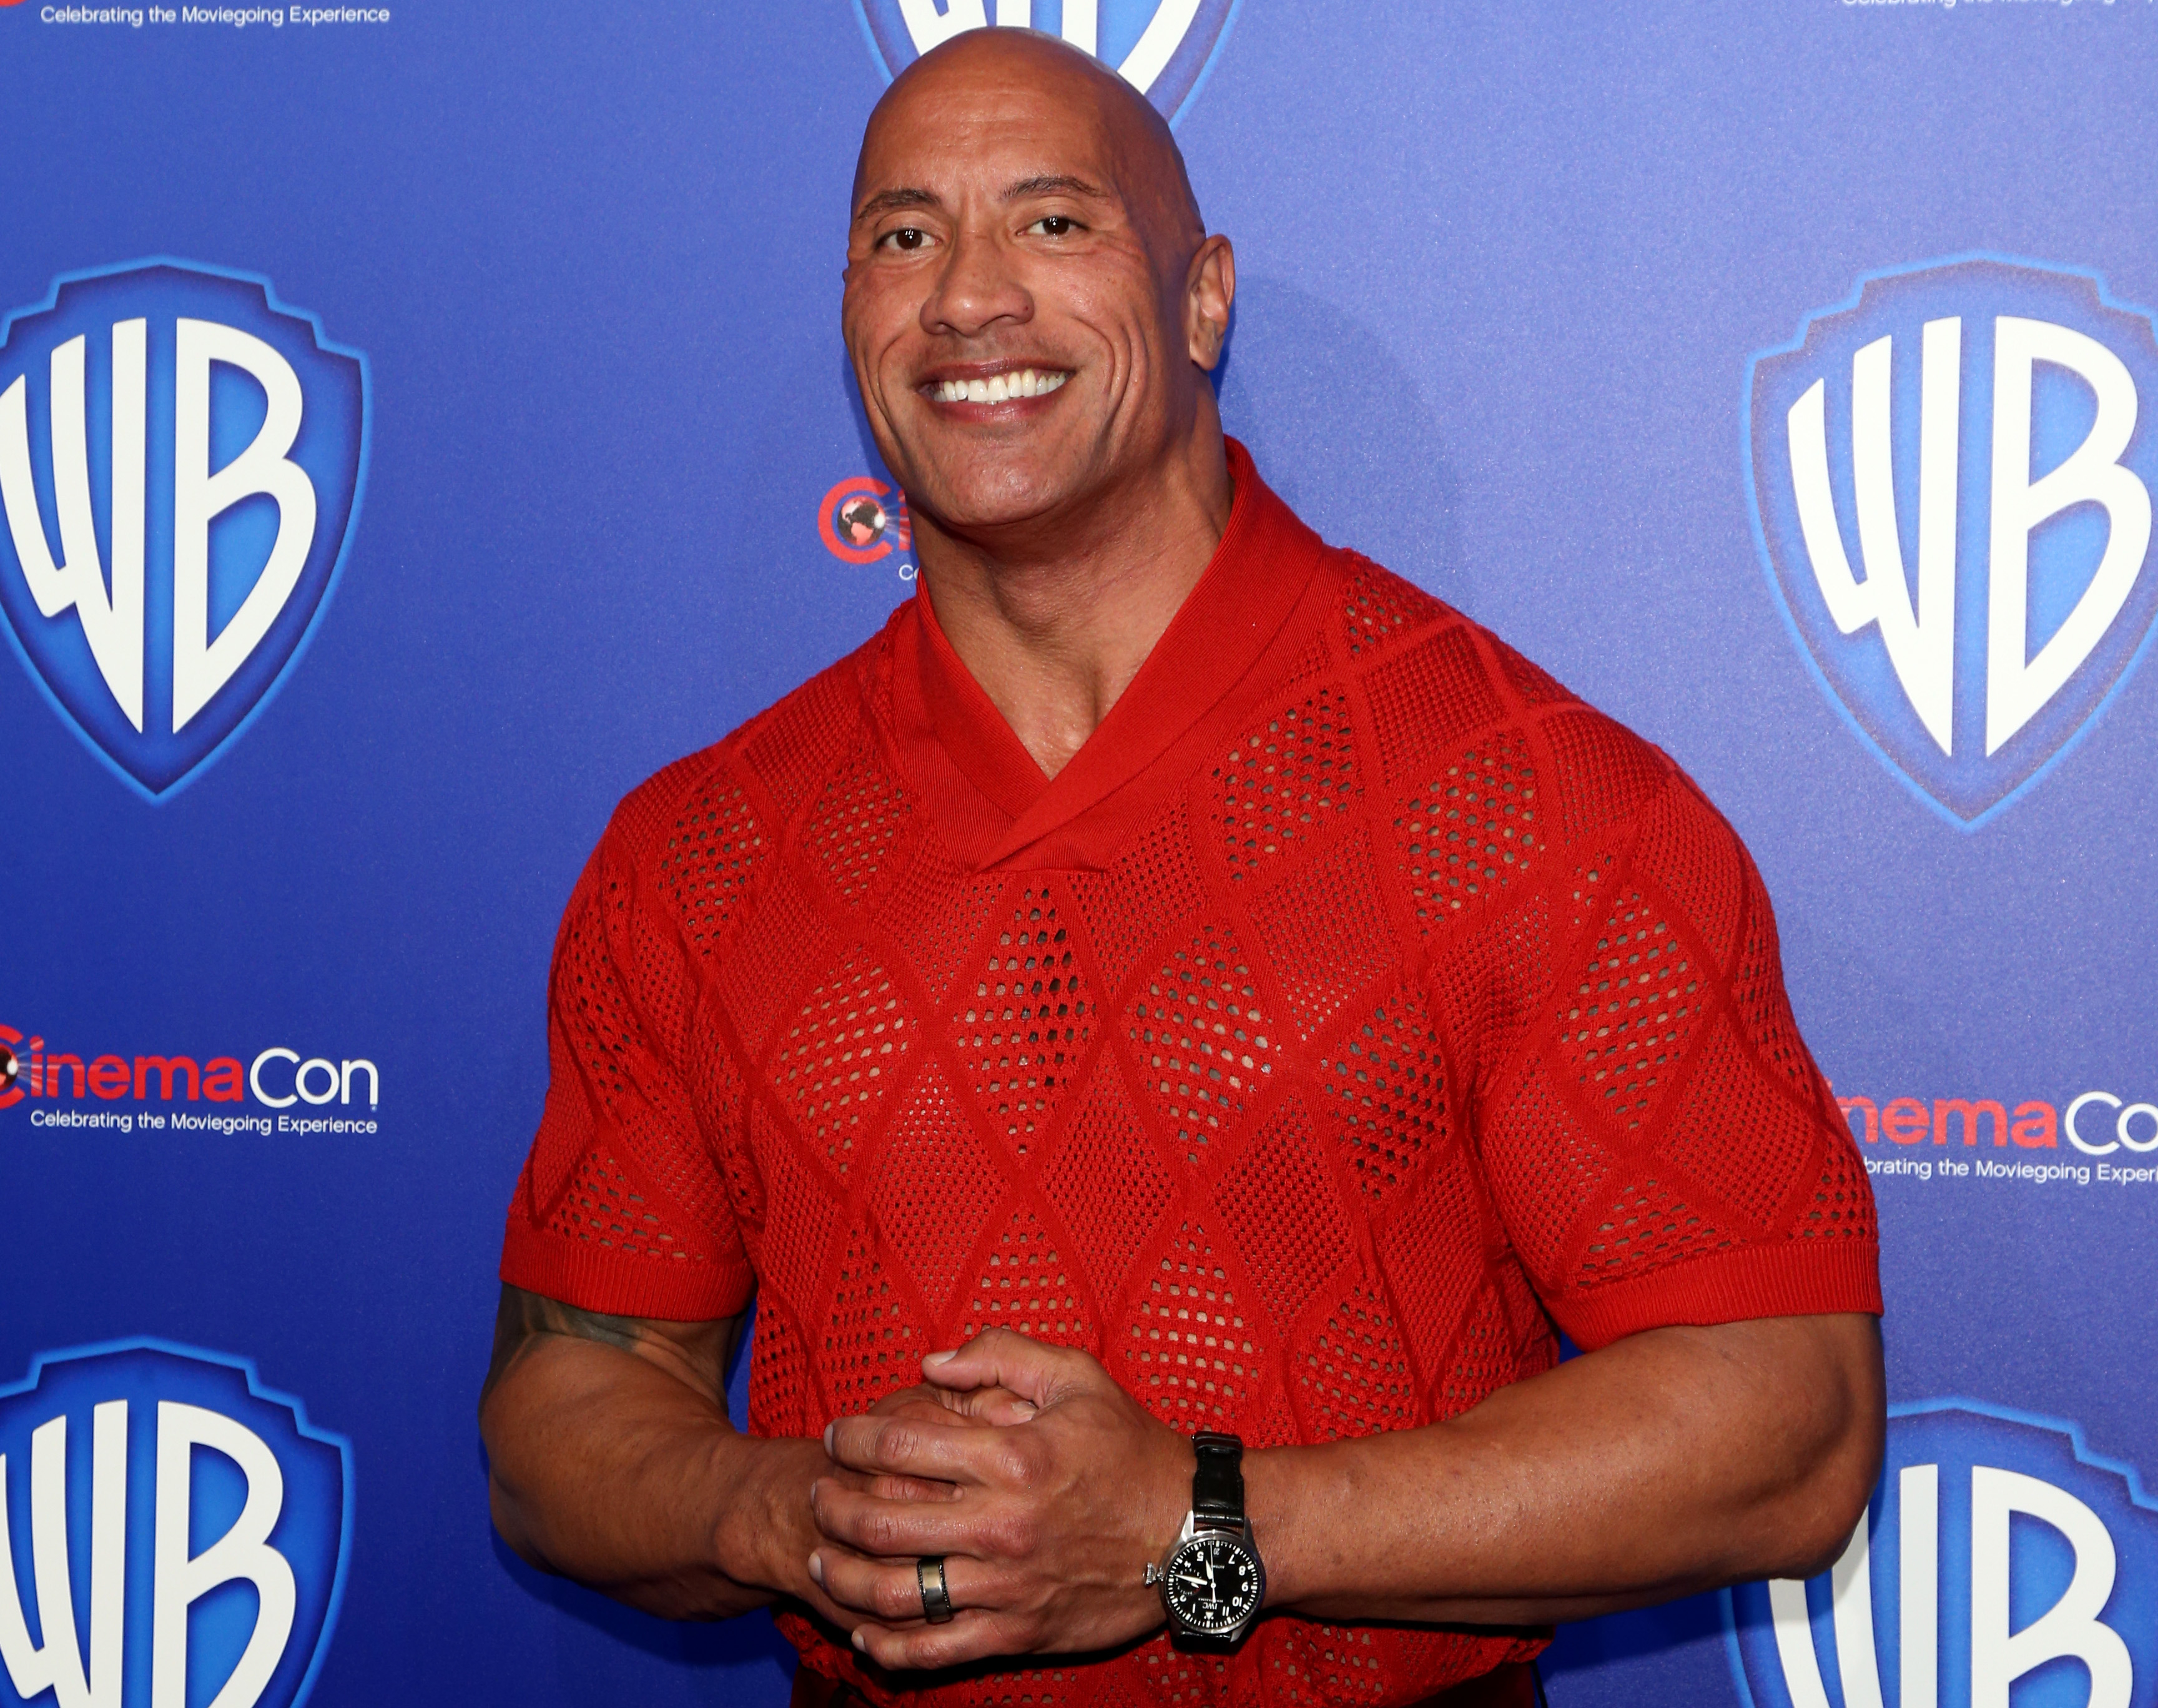 Close-up of The Rock at a media event wearing a short-sleeved shirt